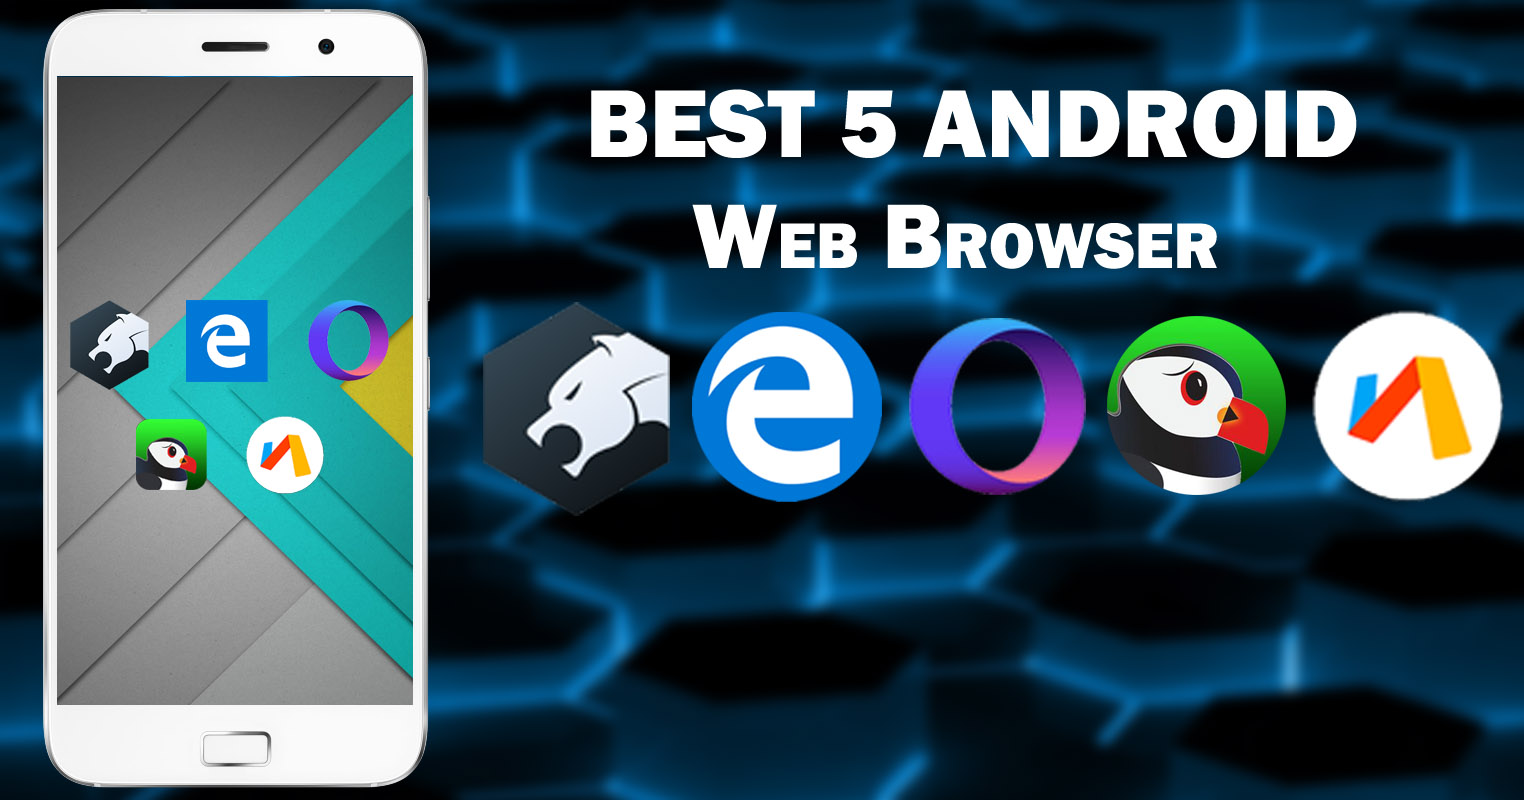 Best 5 Android Web Browser